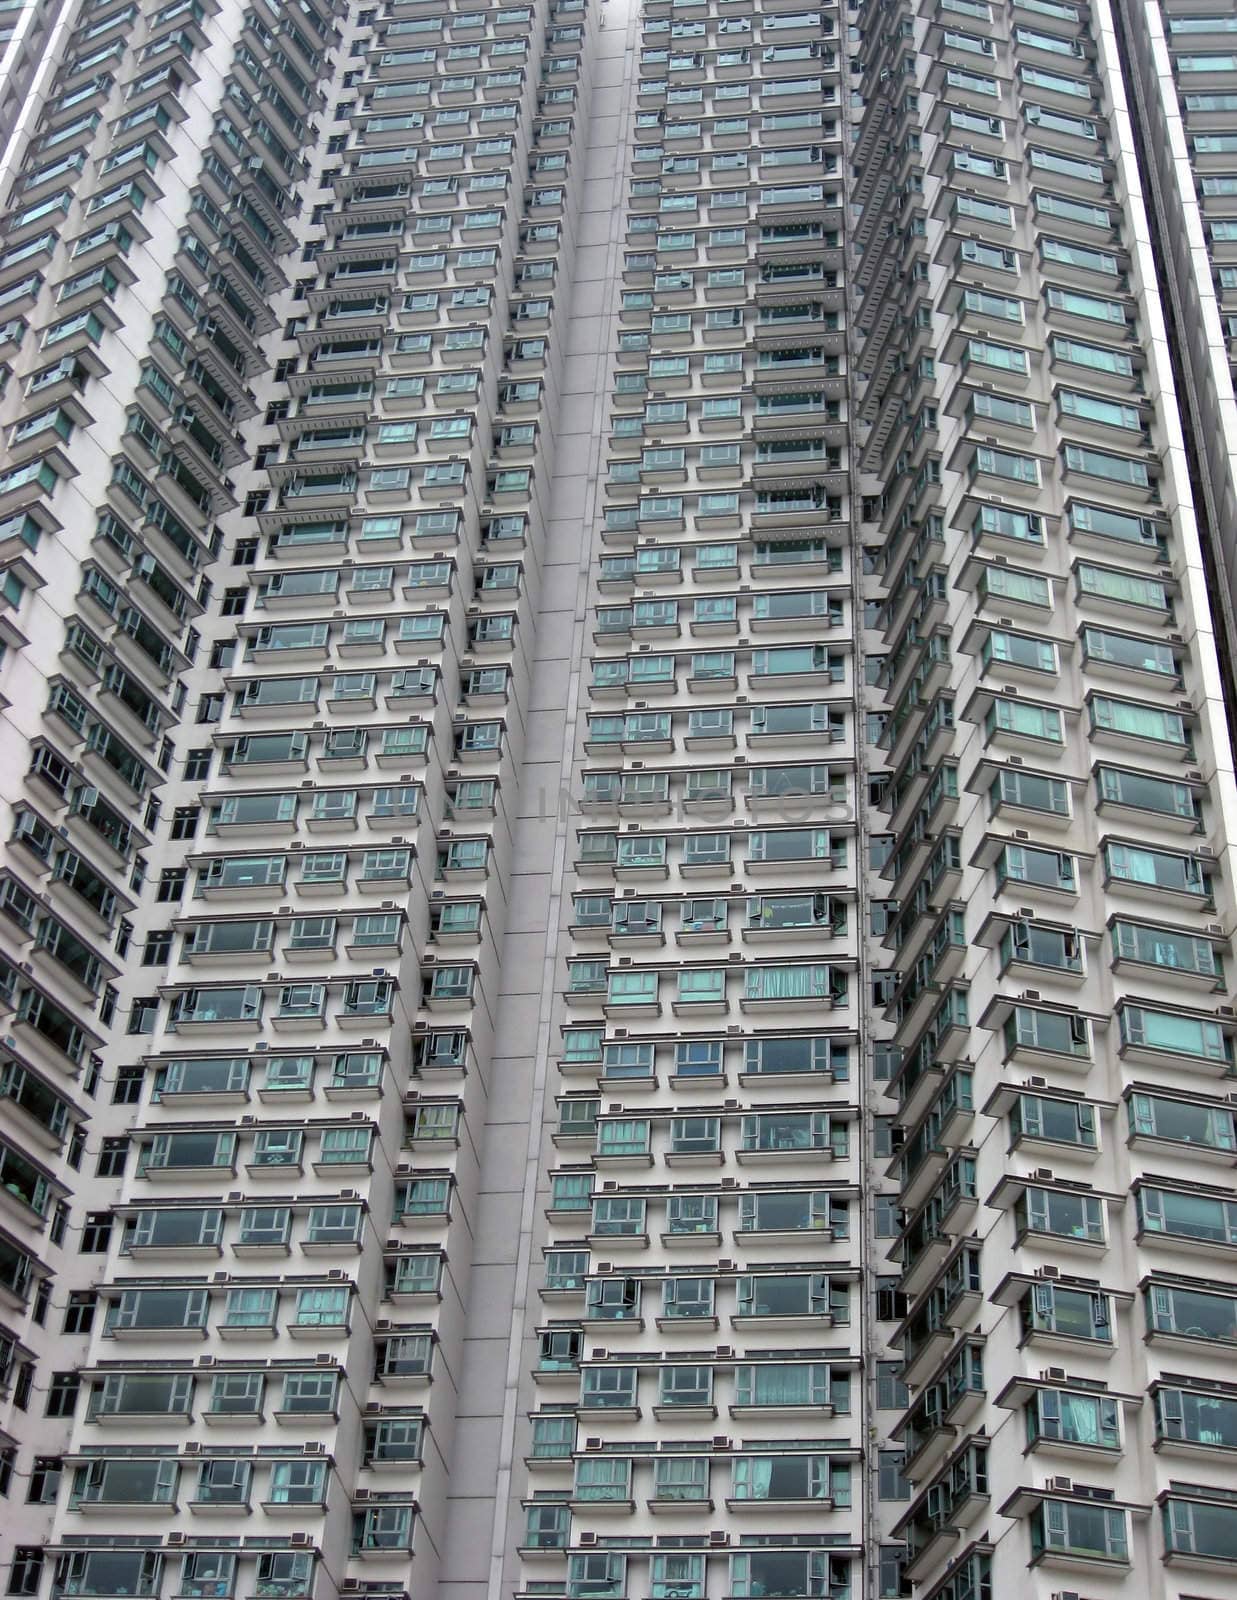 Appartments building in Hong Kong  by ibphoto